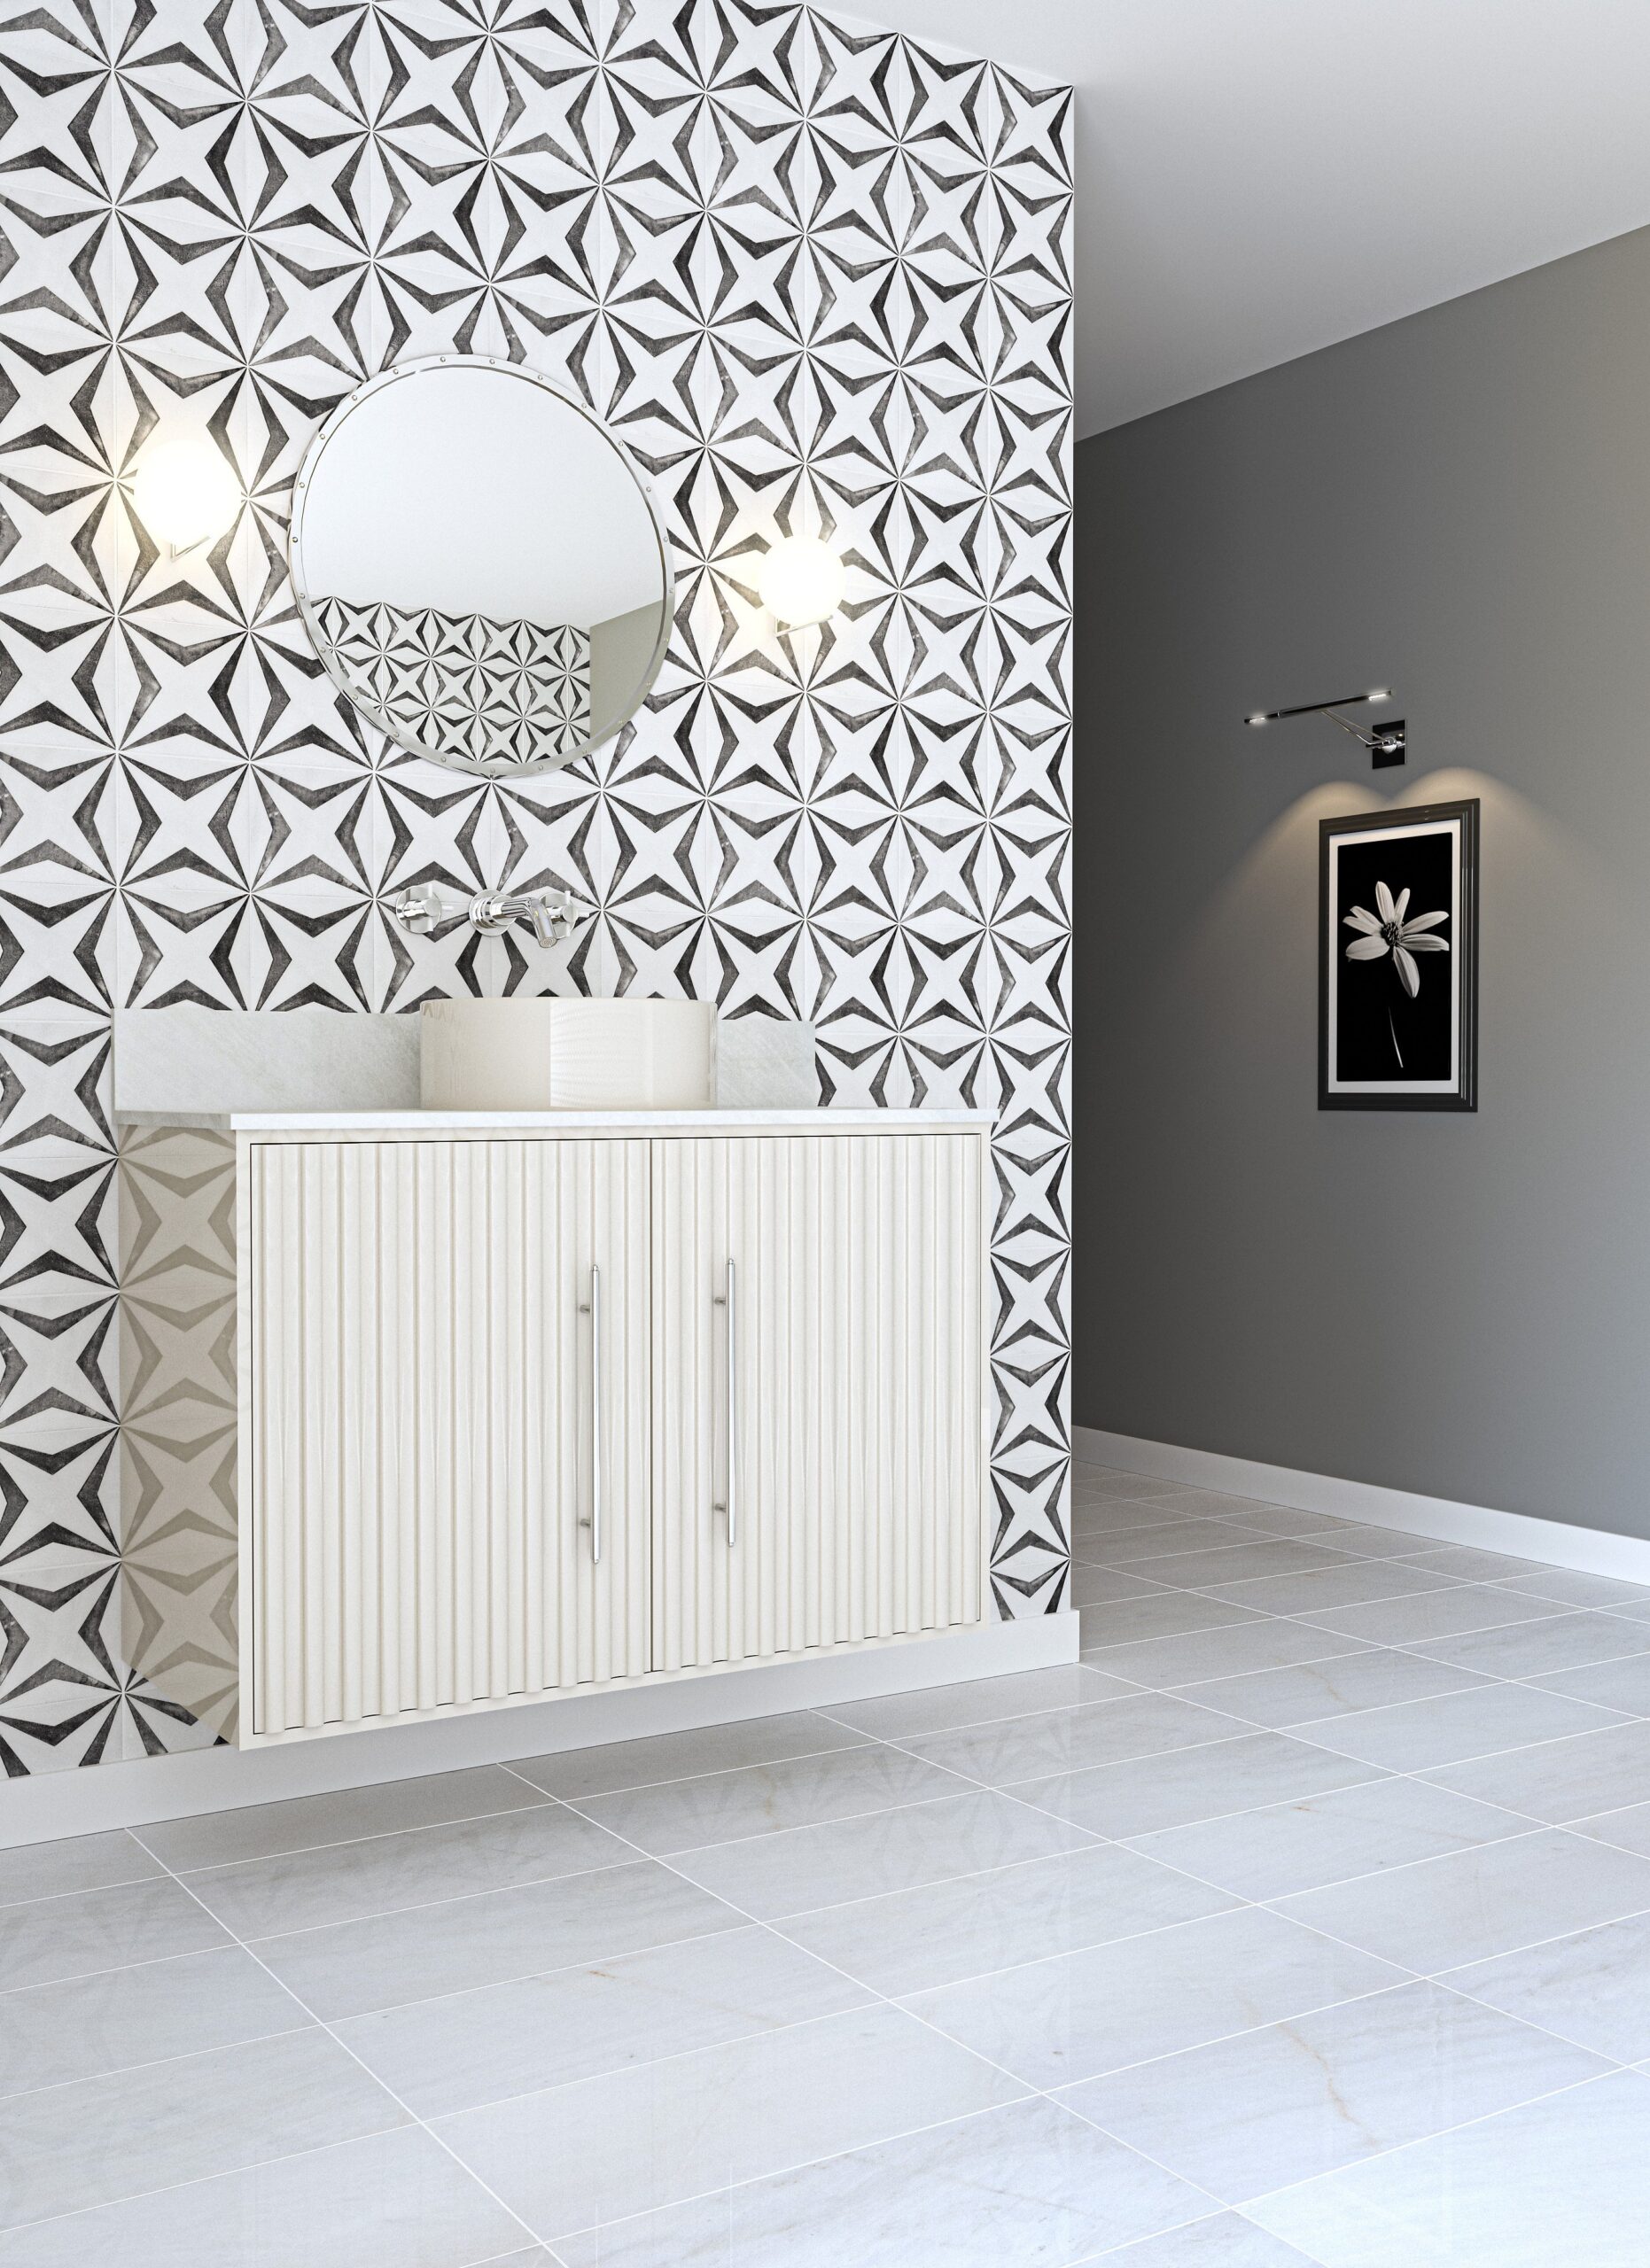 New Nova Collection Stone Tiles by Marble Systems at Country Floors in black and white